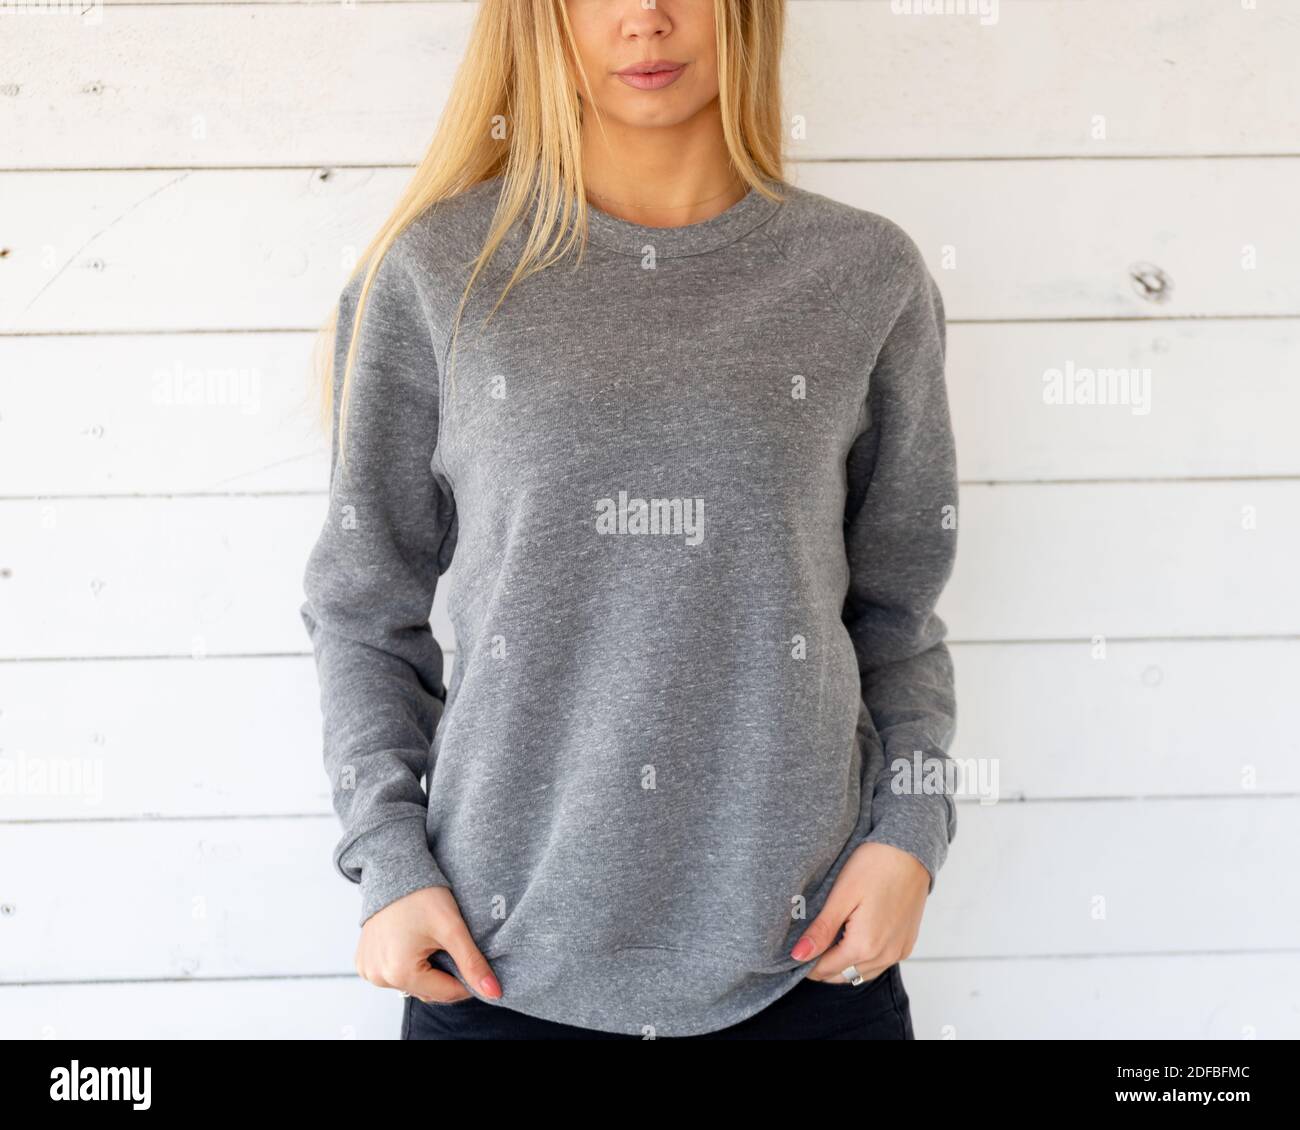 The fornt view of blond hair woman wearing a grey hoodie or blouse. She is standing on white board. Fashion outfit for mockup. Stock Photo